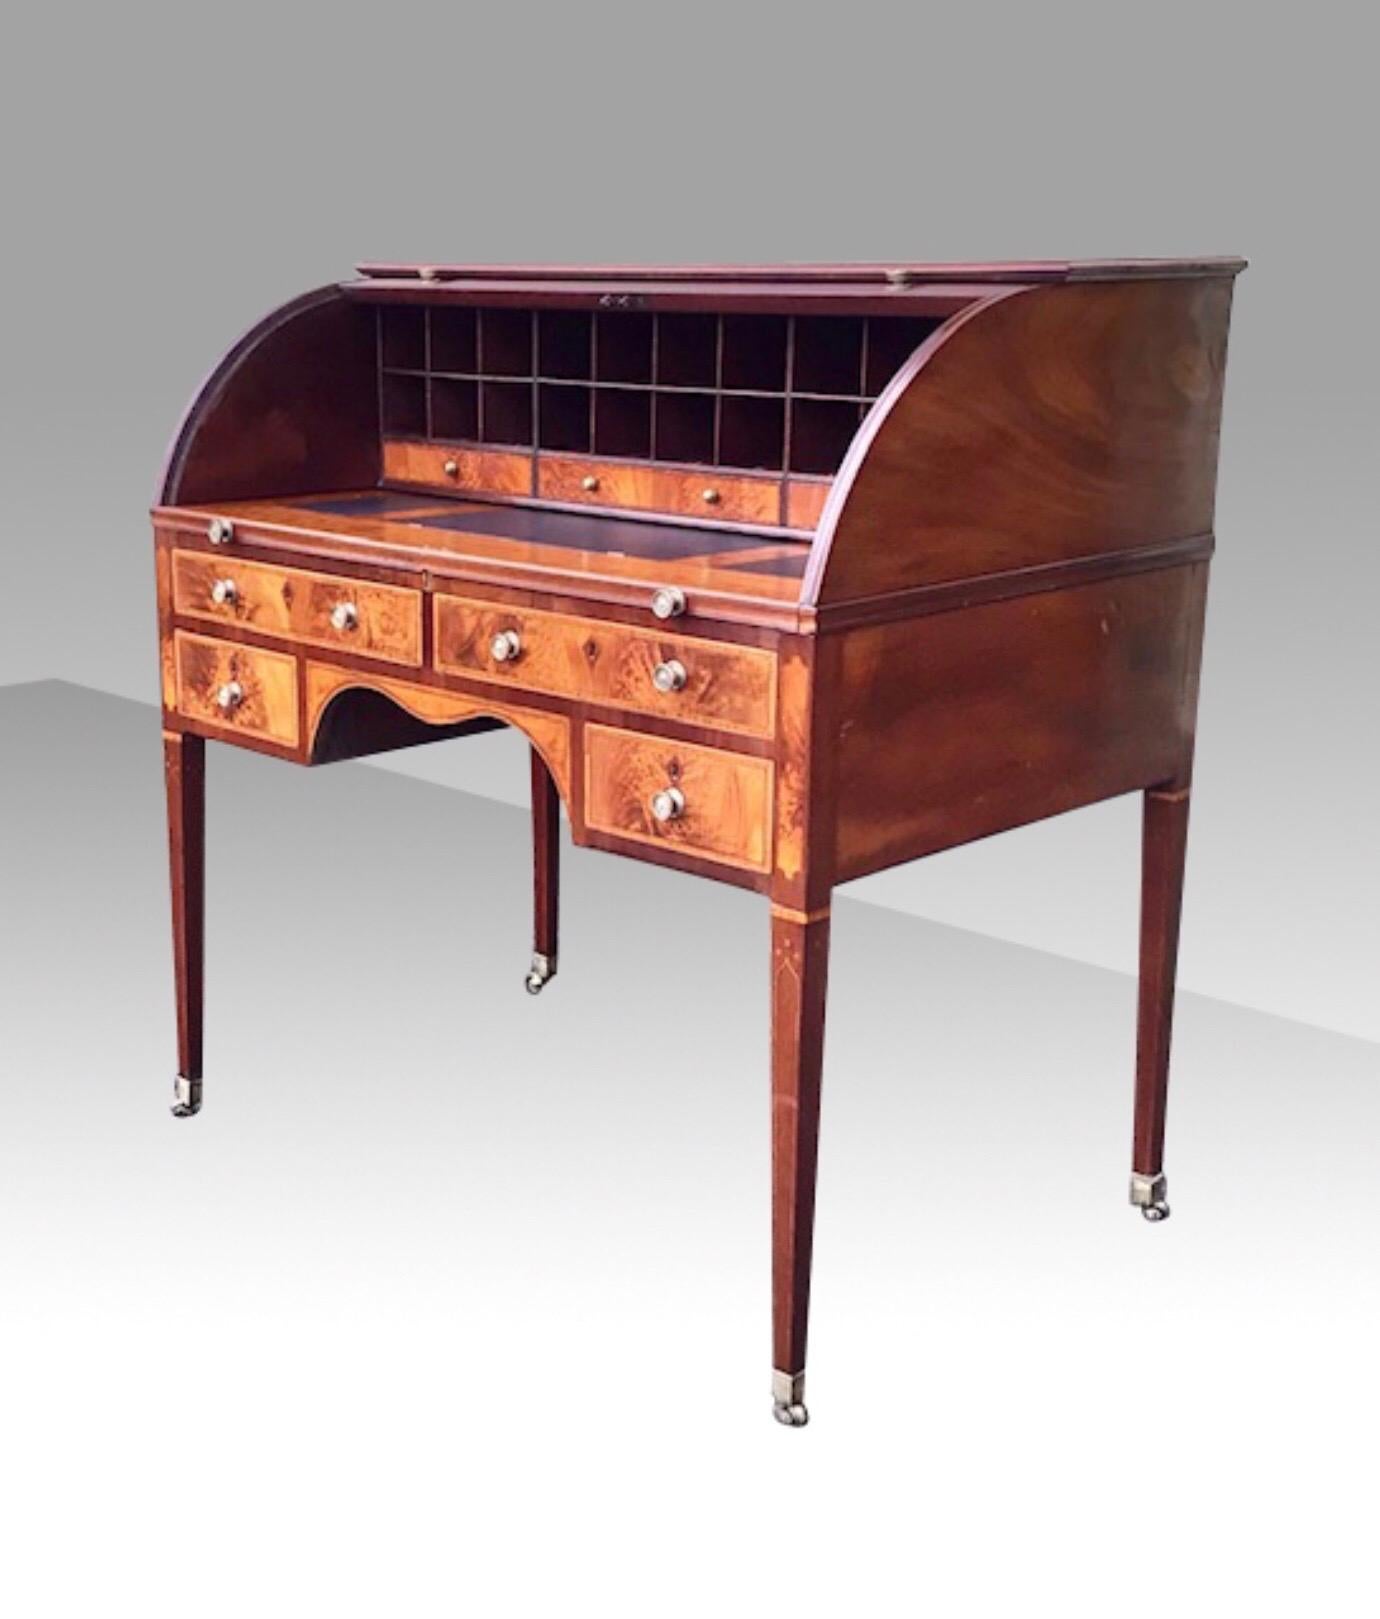 circa 1780 - 1790
We are delighted to have for sale this very rare George III Hepplewhite period inlaid mahogany tambour estate writing desk. 
The secretaire is fully fitted with lettered pigeon holes and choice mahogany,ebony strung fruitwood